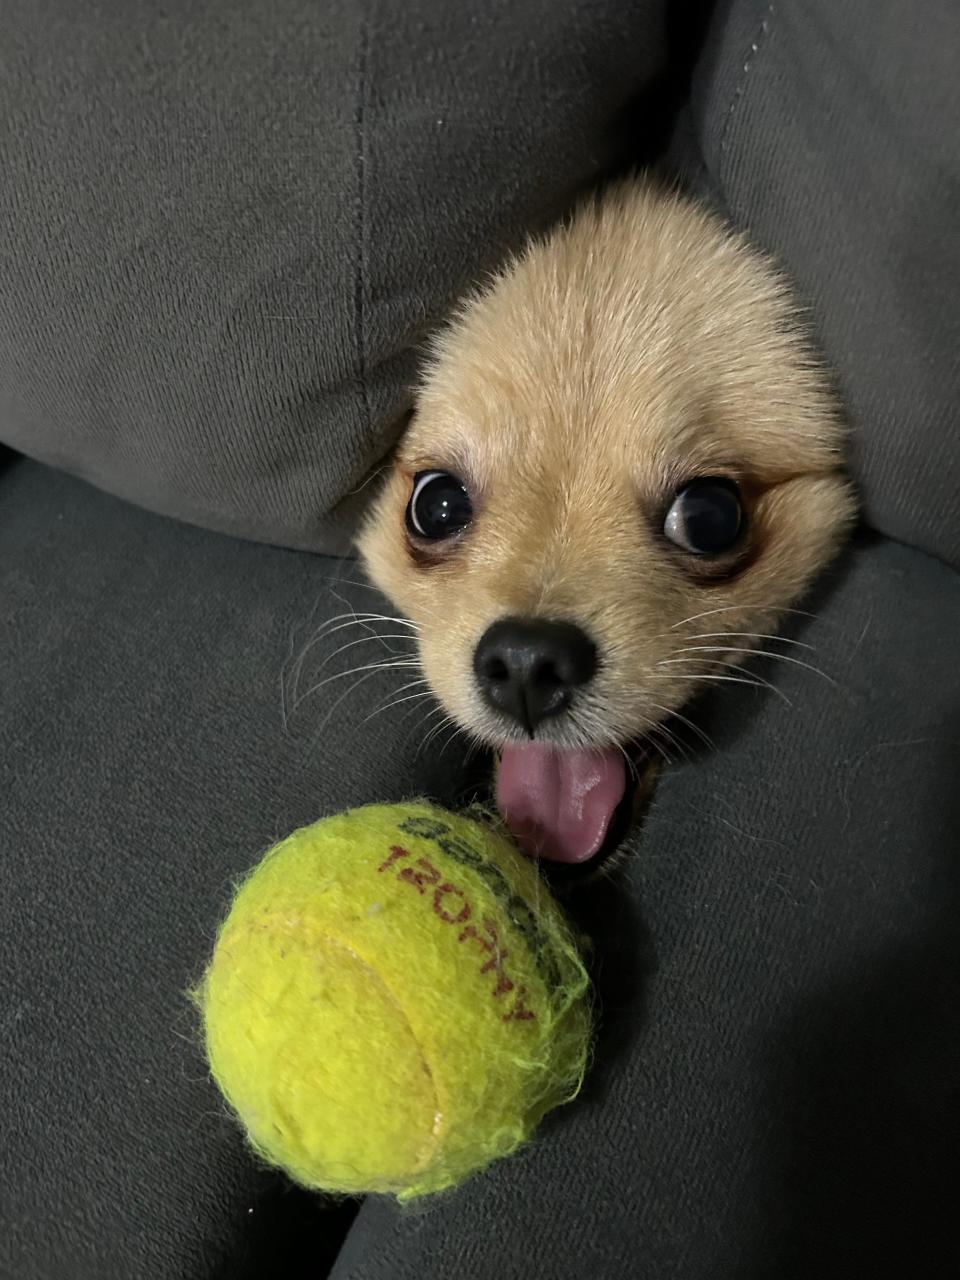 A dog sticks its head out of couch cushions and licks a tennis ball